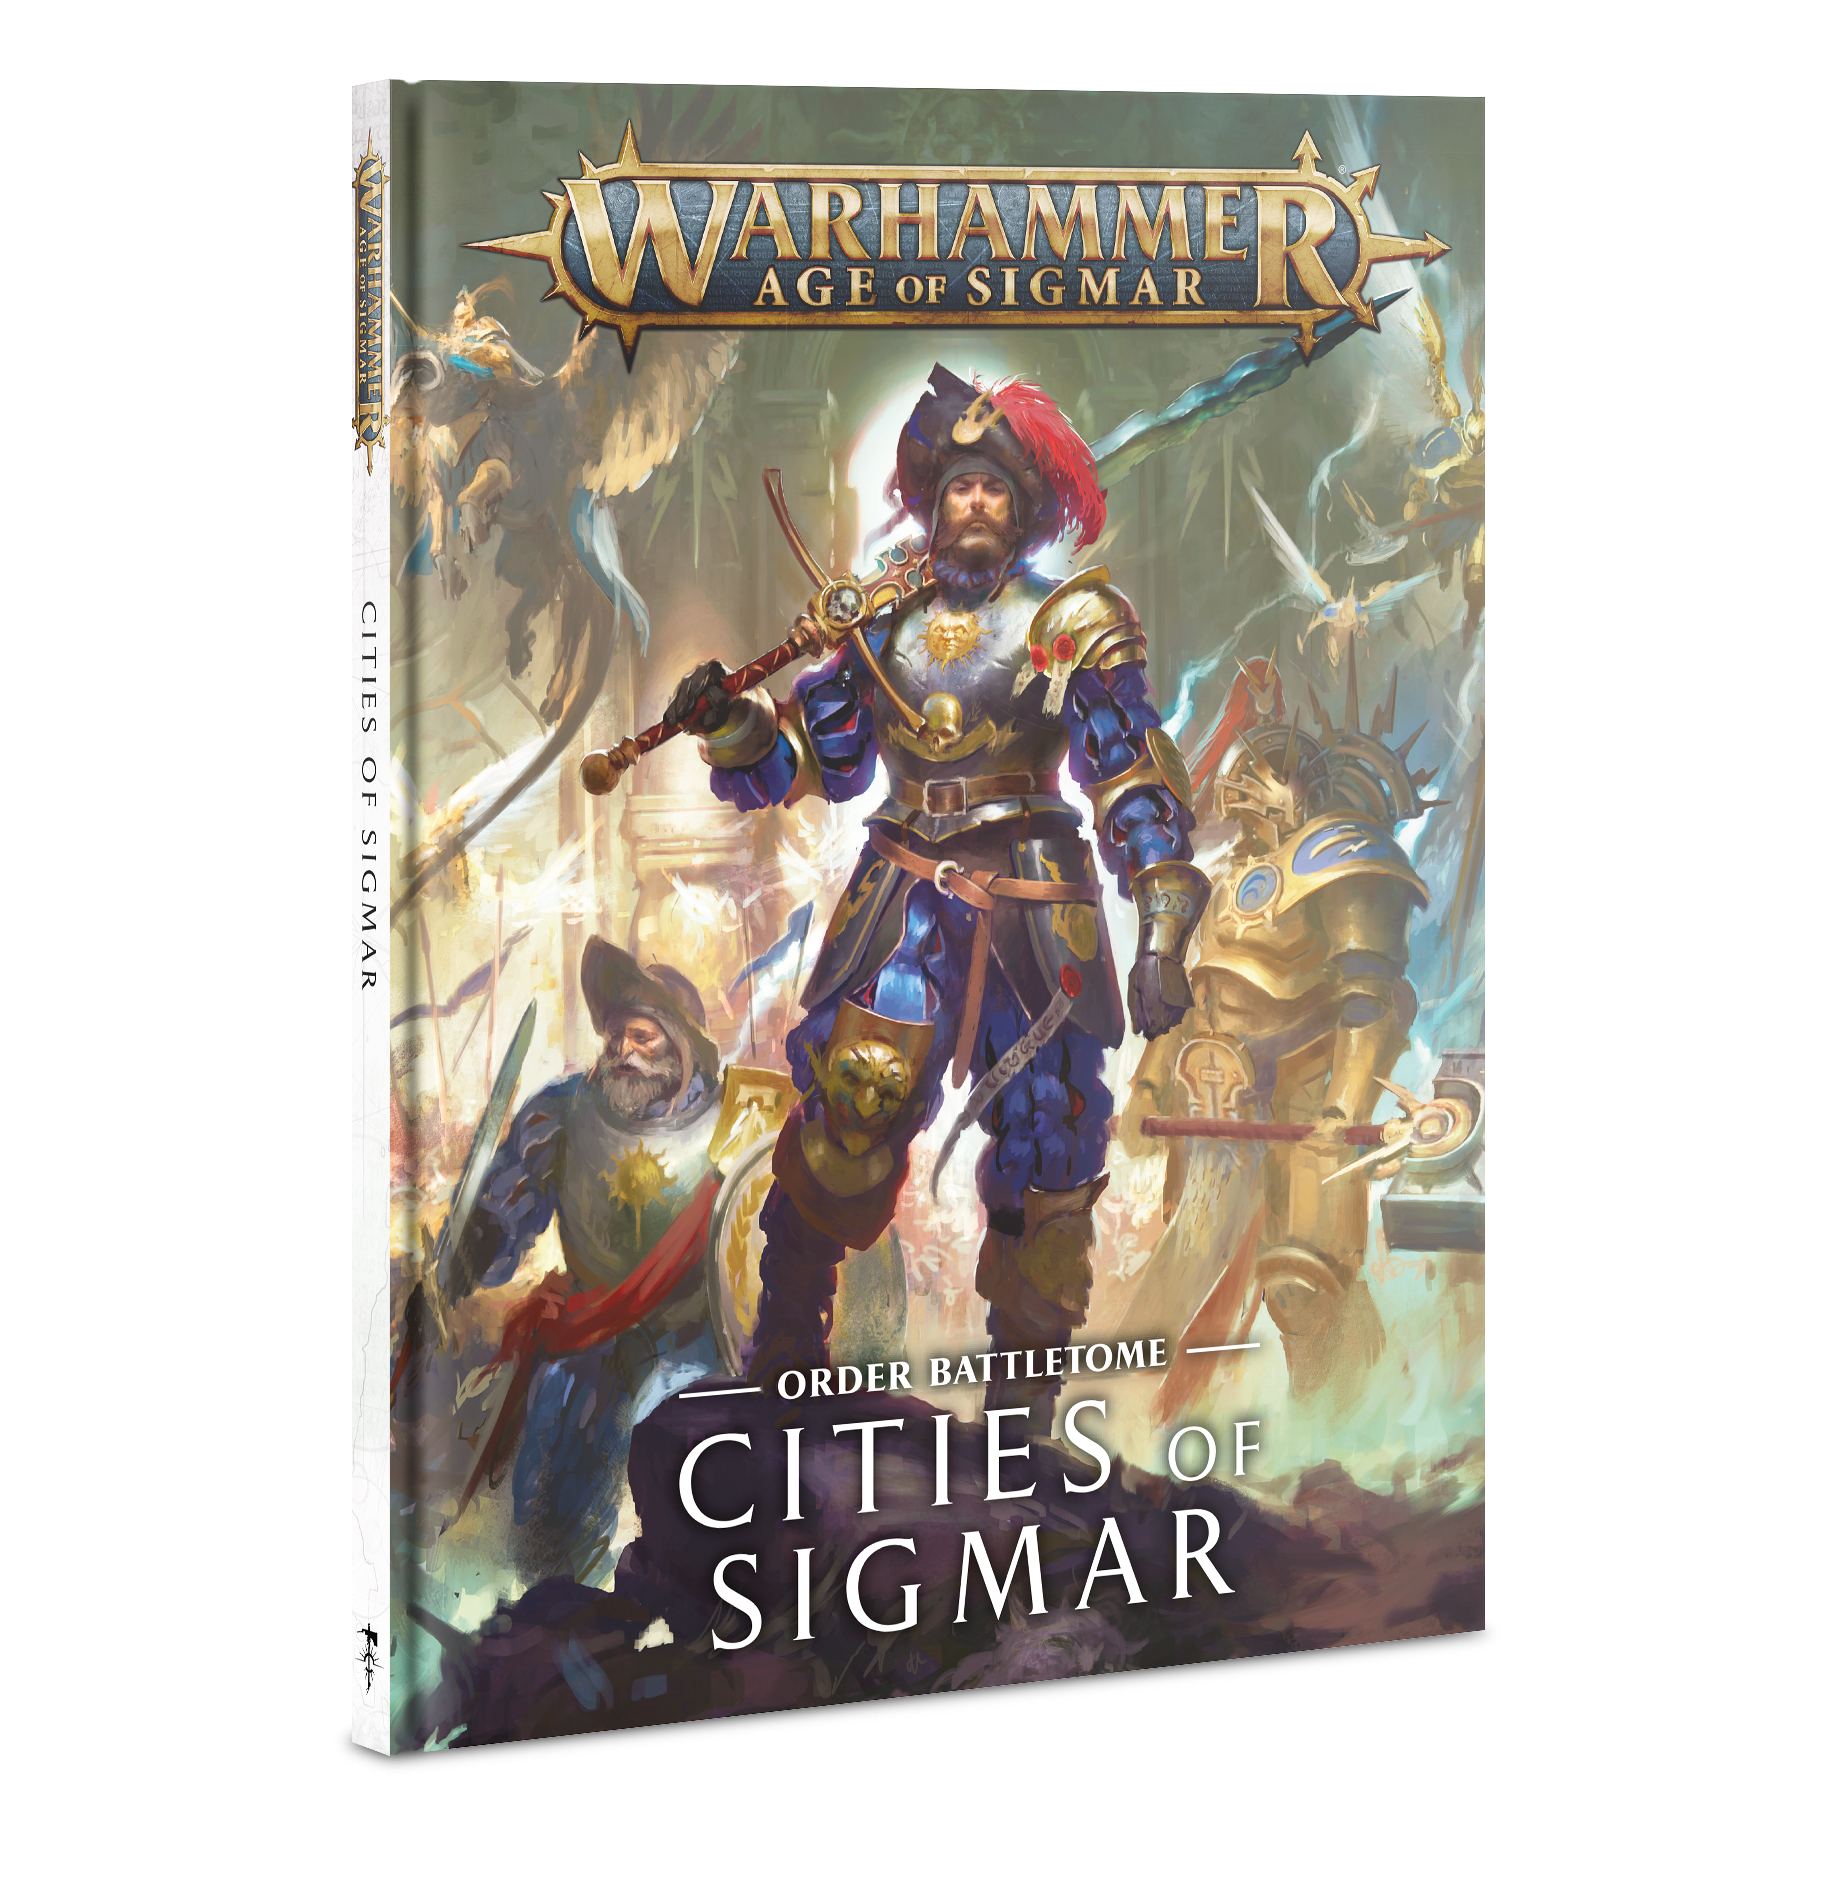 Age of Sigmar: Battletome - Cities of Sigmar book cover